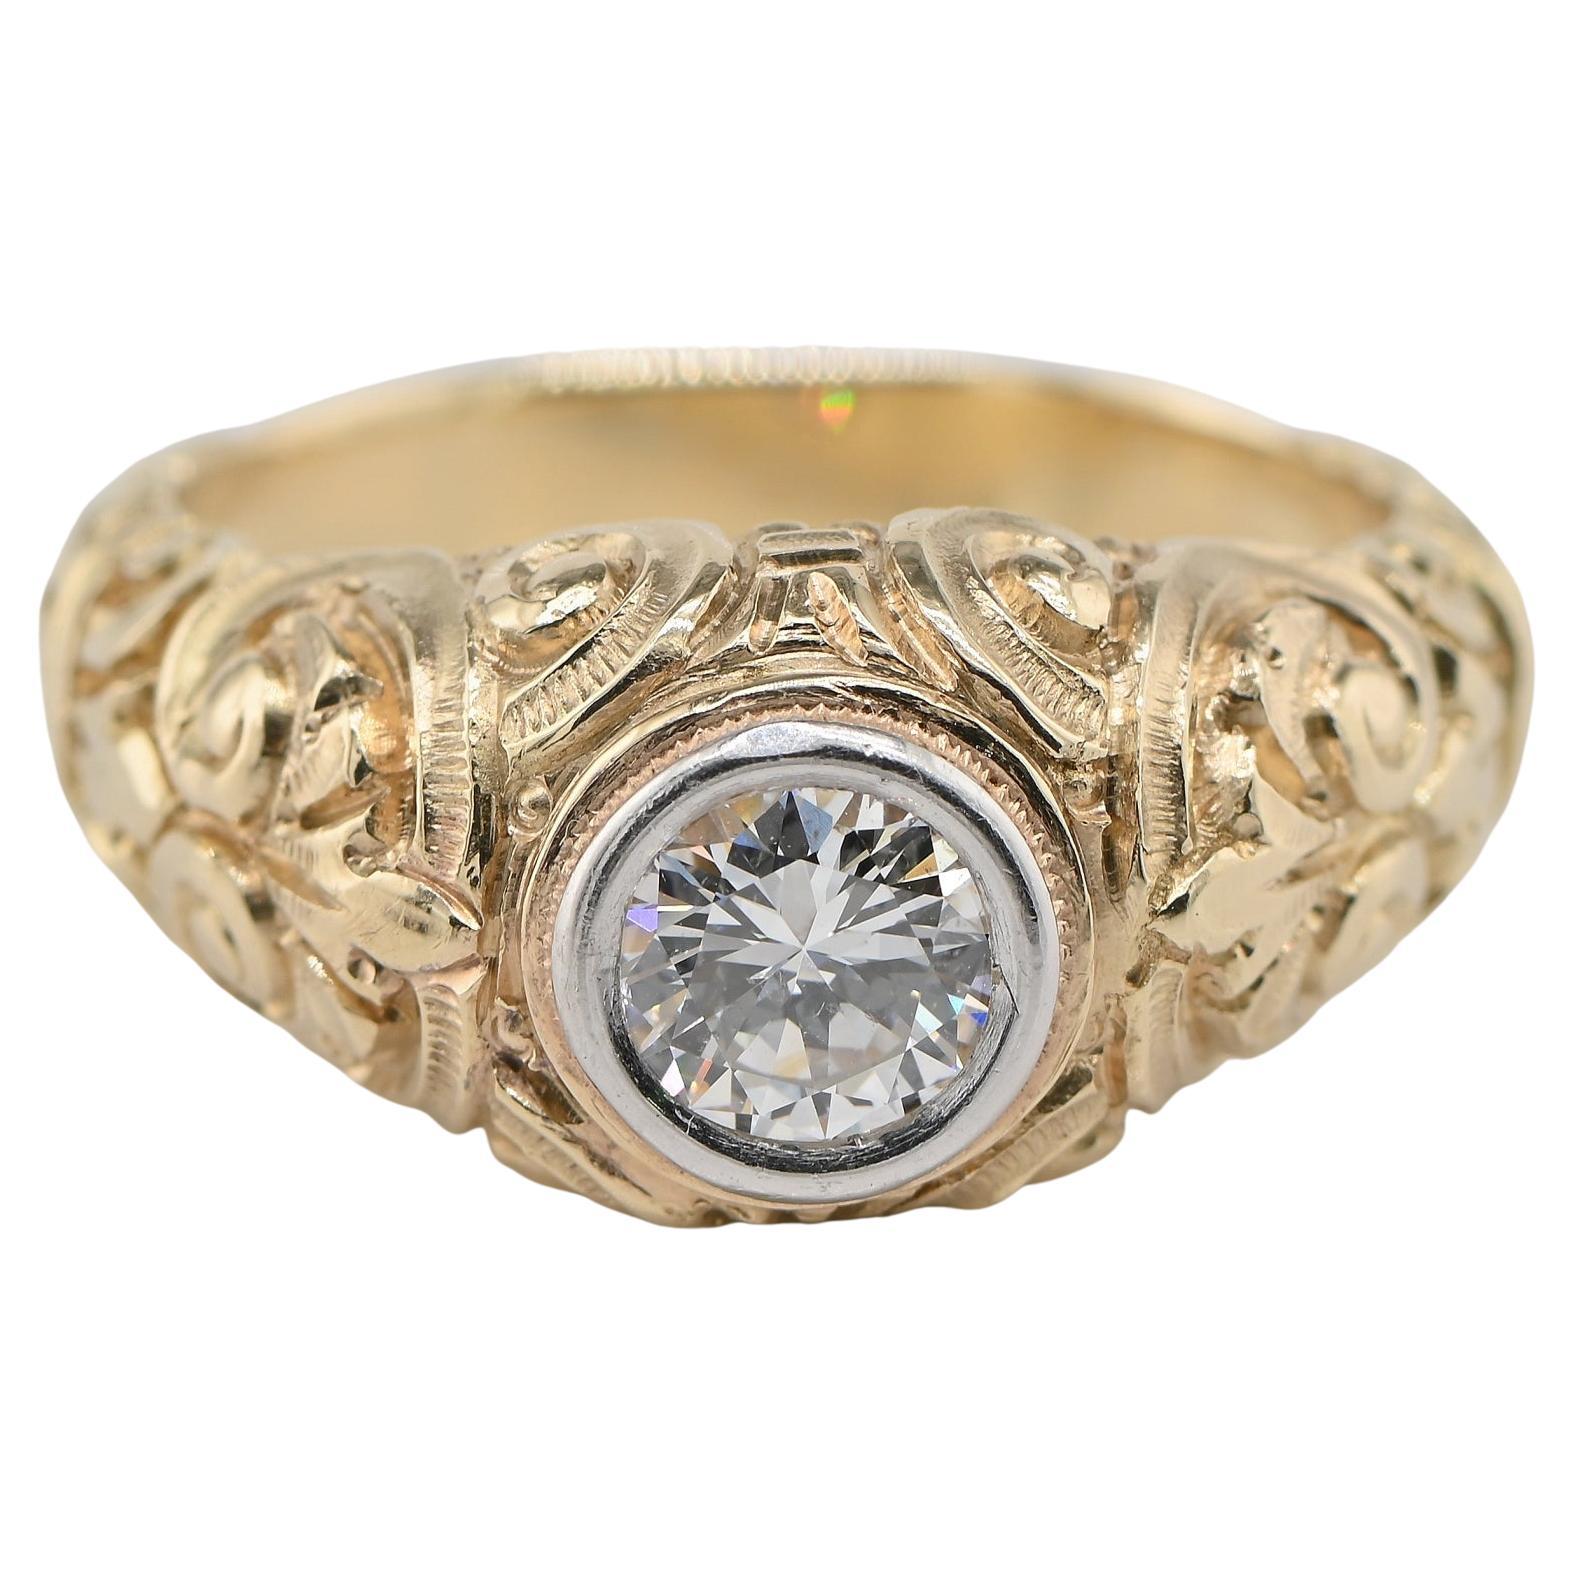 Edwardian .75 Ct Diamond Solitaire Deep Carved 18 KT Gold Ring